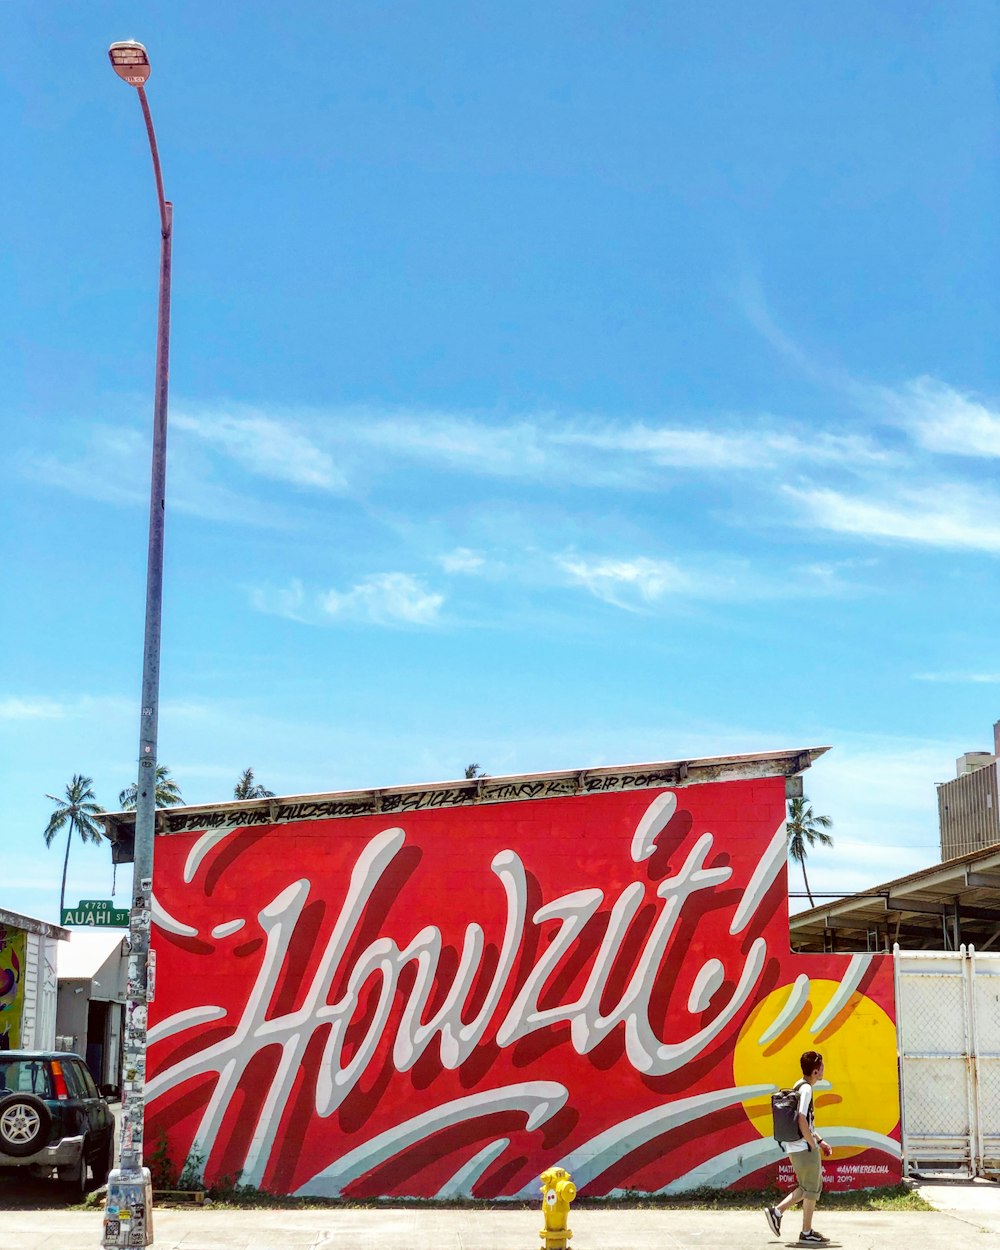 a large coca - cola advertisement painted on the side of a building